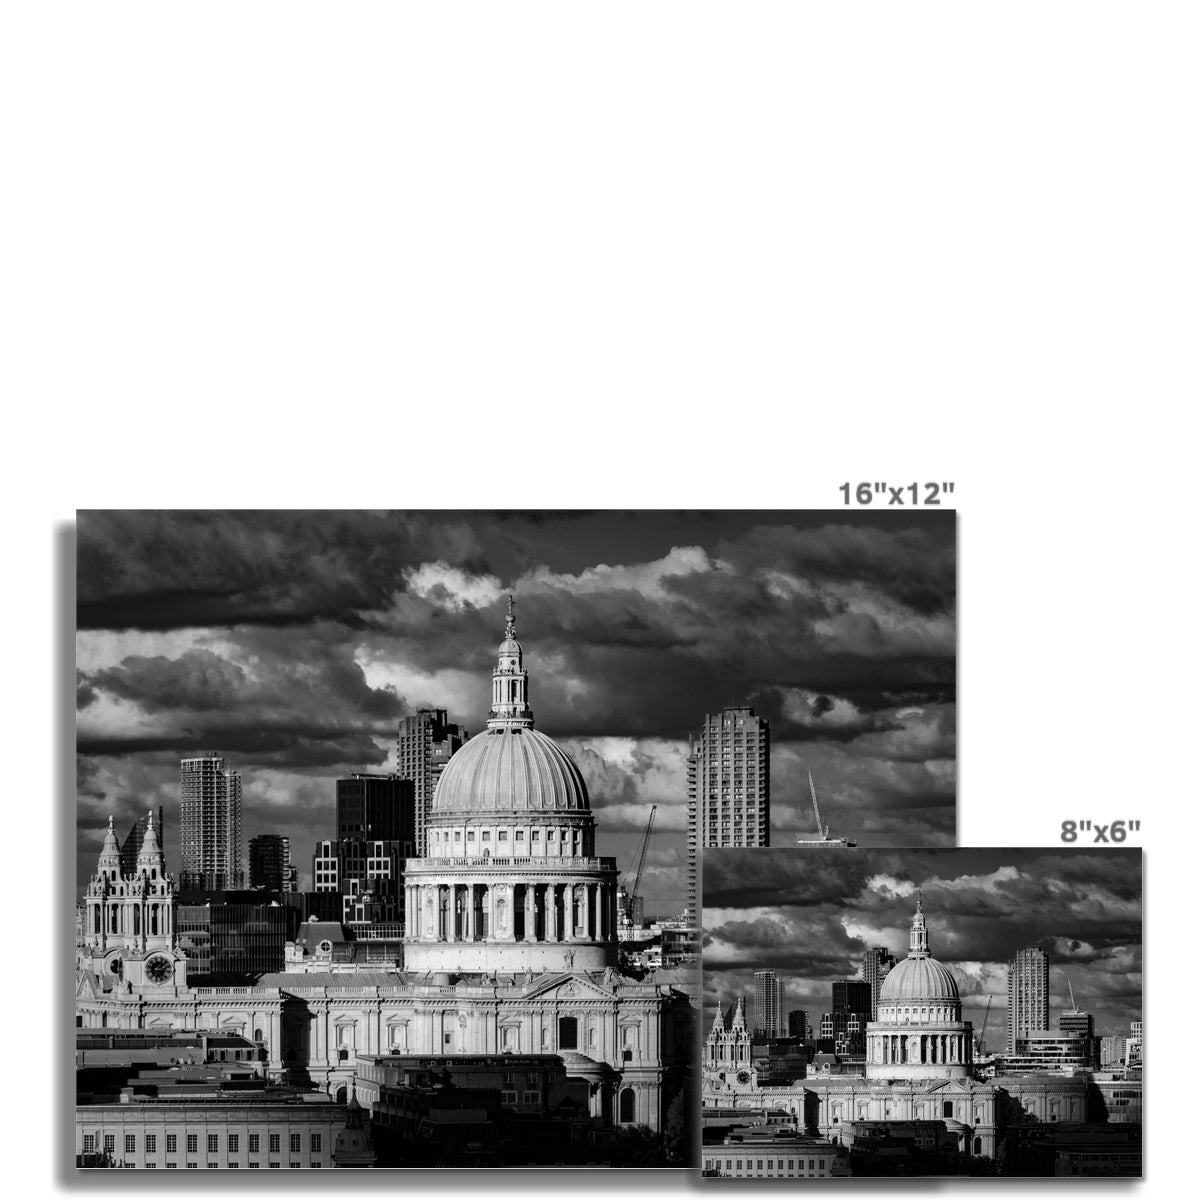 St Paul's Cathedral, London. Fine Art Print